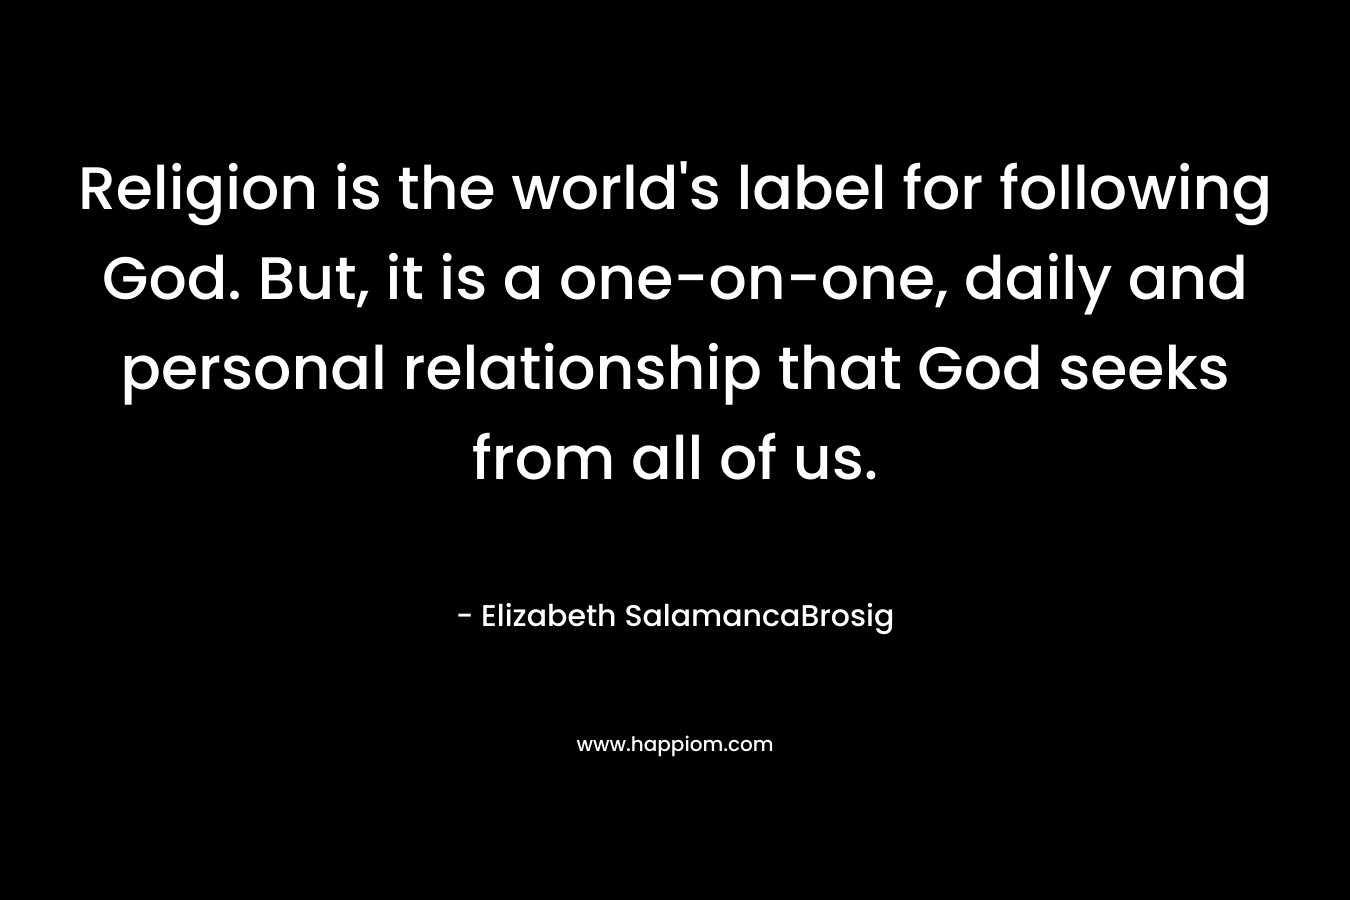 Religion is the world’s label for following God. But, it is a one-on-one, daily and personal relationship that God seeks from all of us. – Elizabeth SalamancaBrosig